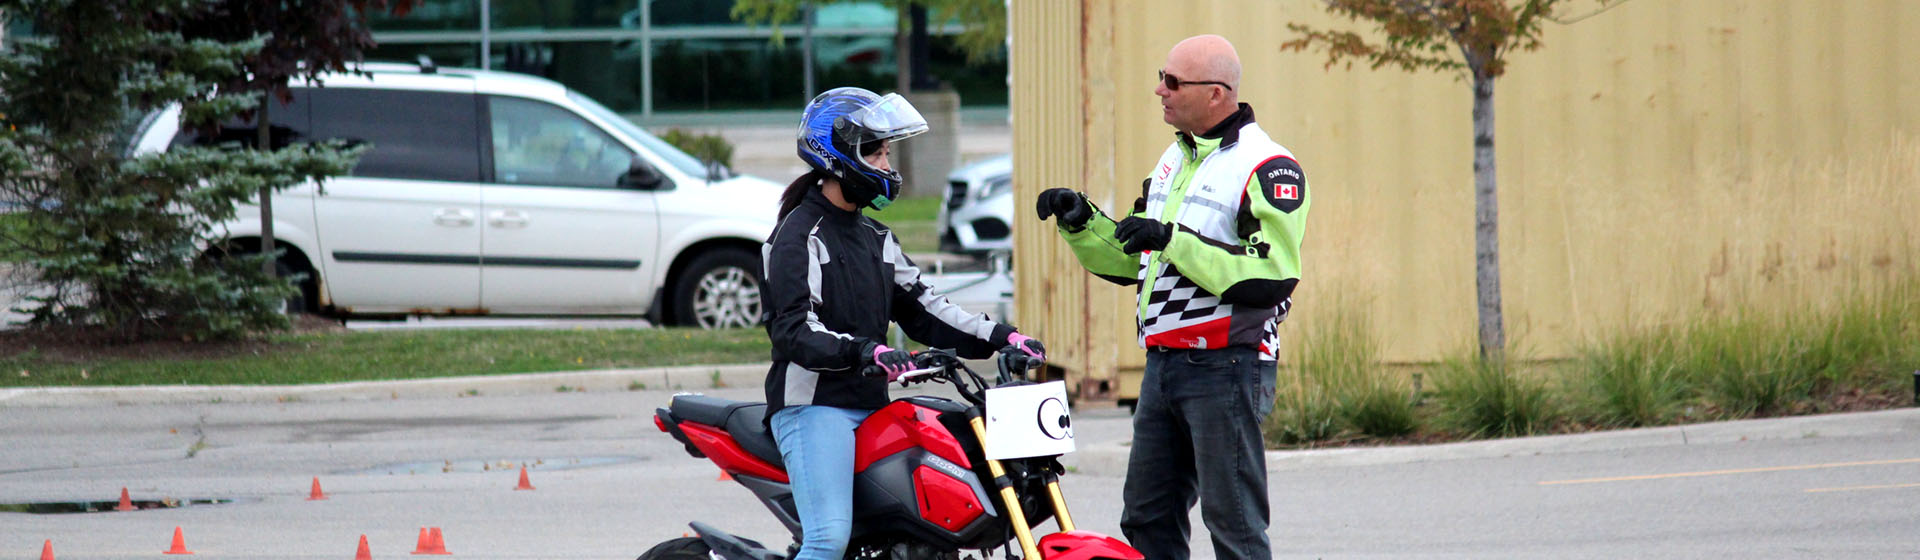 Learn to ride from the professionals at MTOhp